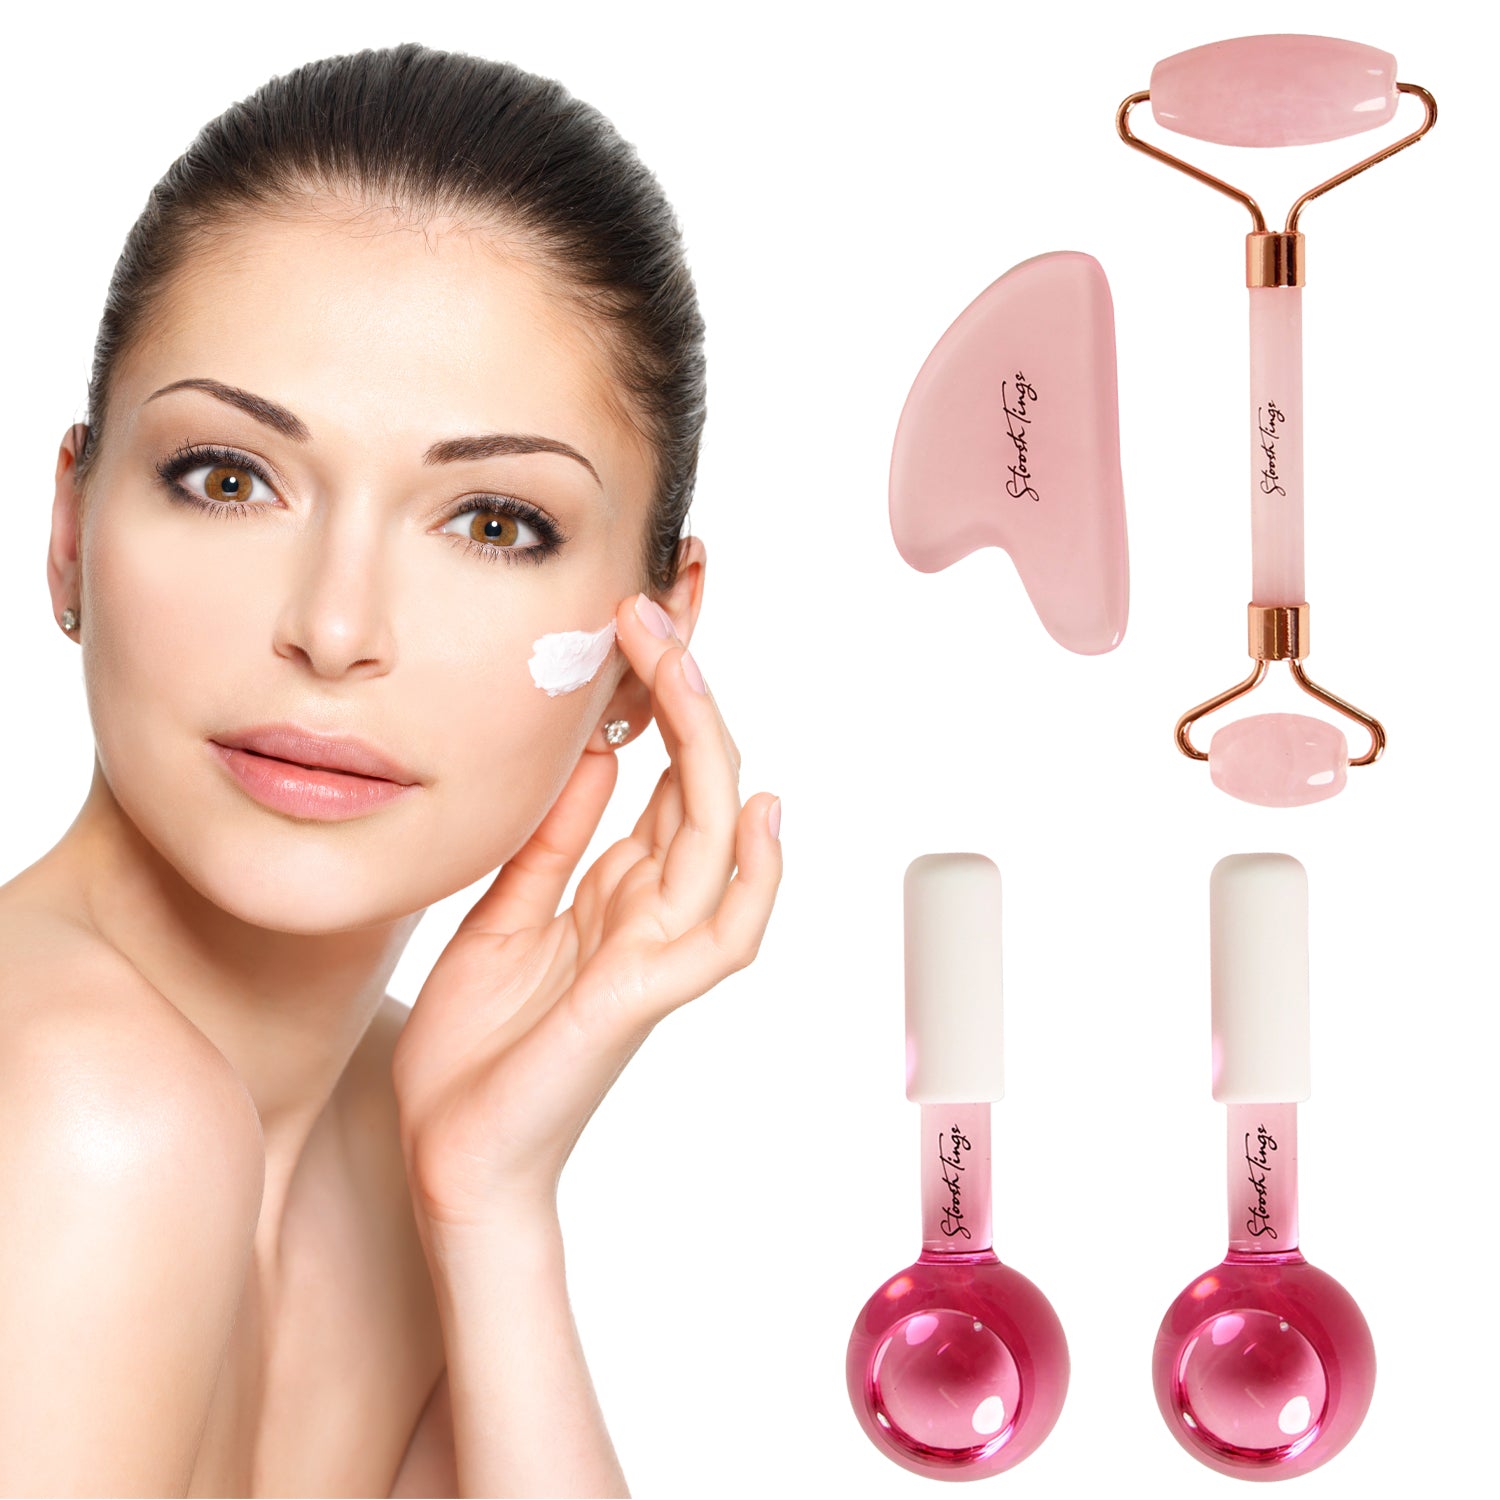 StooshTings Beauty Ice Globes for Face, Gua Sha, Beauty Roller 4-Piece Pink Set